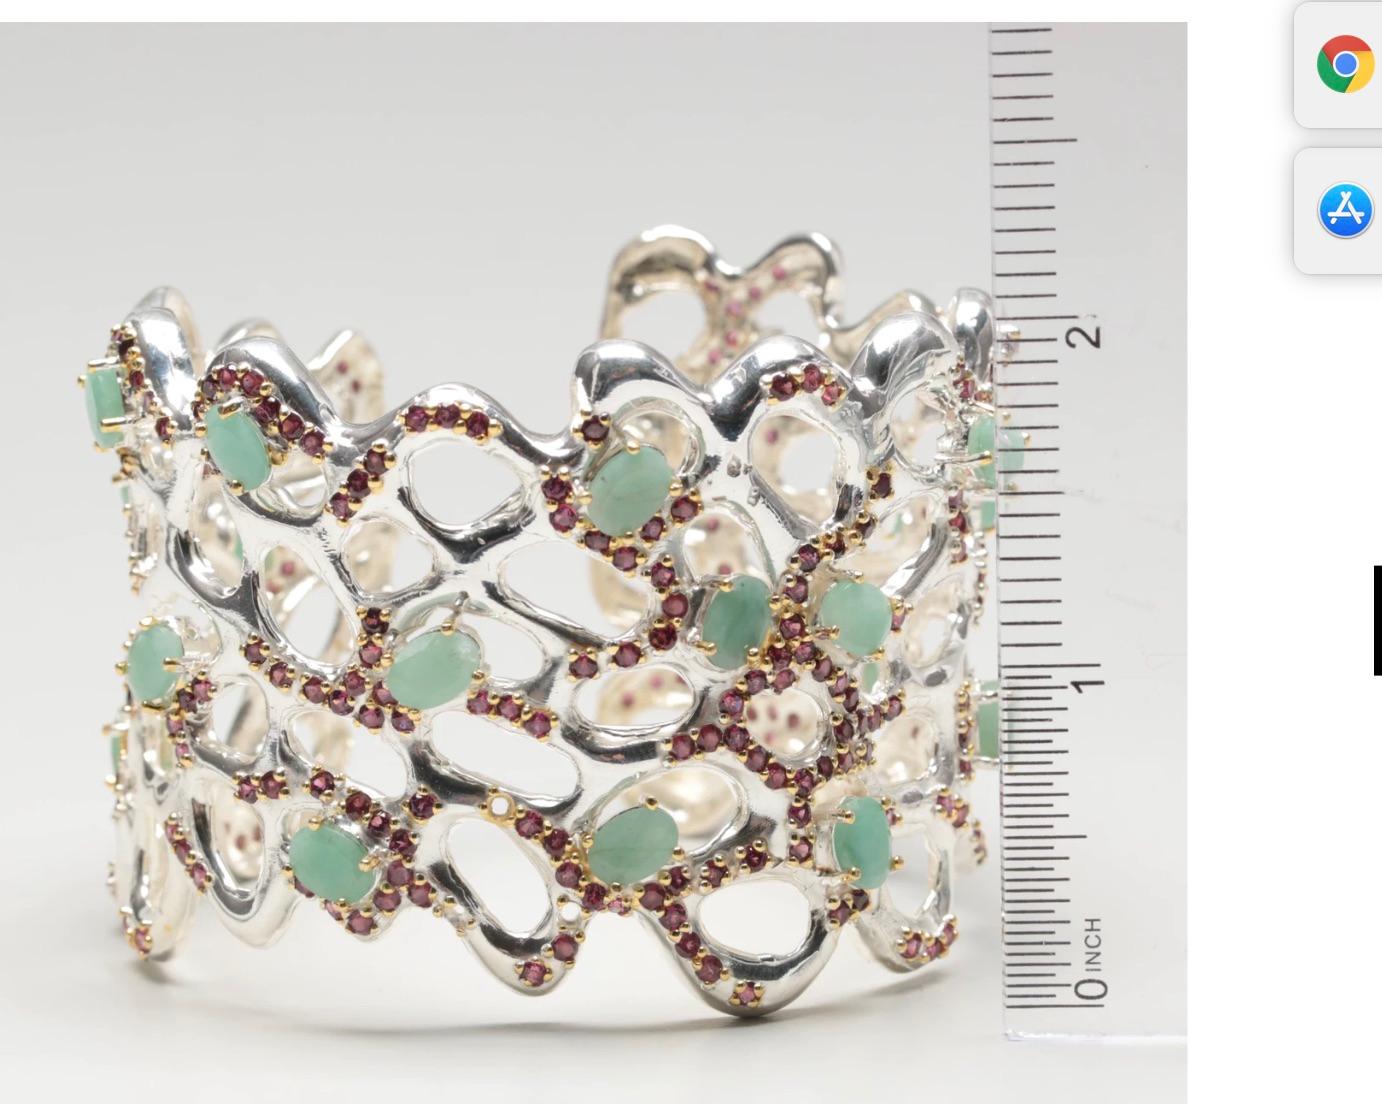 Made to Impress and Fall in Love!!!
Stunning Open Work Sterling Silver Cuff Bracelet with Emeralds, Rhodolite Garnets and Sapphire by an unknown but inspired jewelry designer. Matching earrings and ring available 

Materials:	Sterling silver
Stone